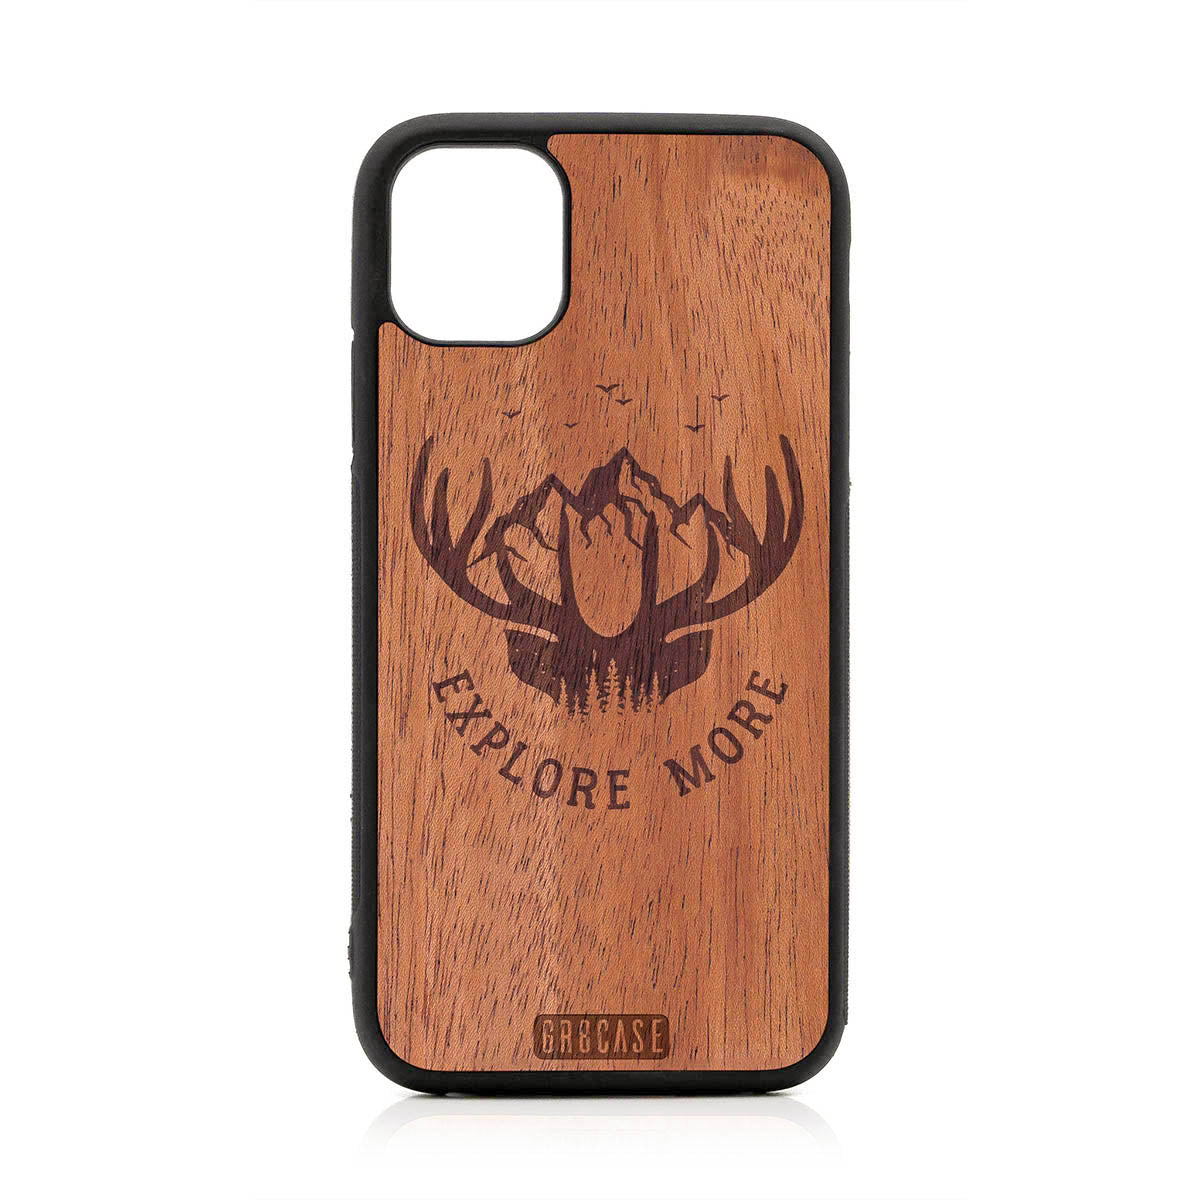 Explore More (Forest, Mountains & Antlers) Design Wood Case For iPhone 11 by GR8CASE